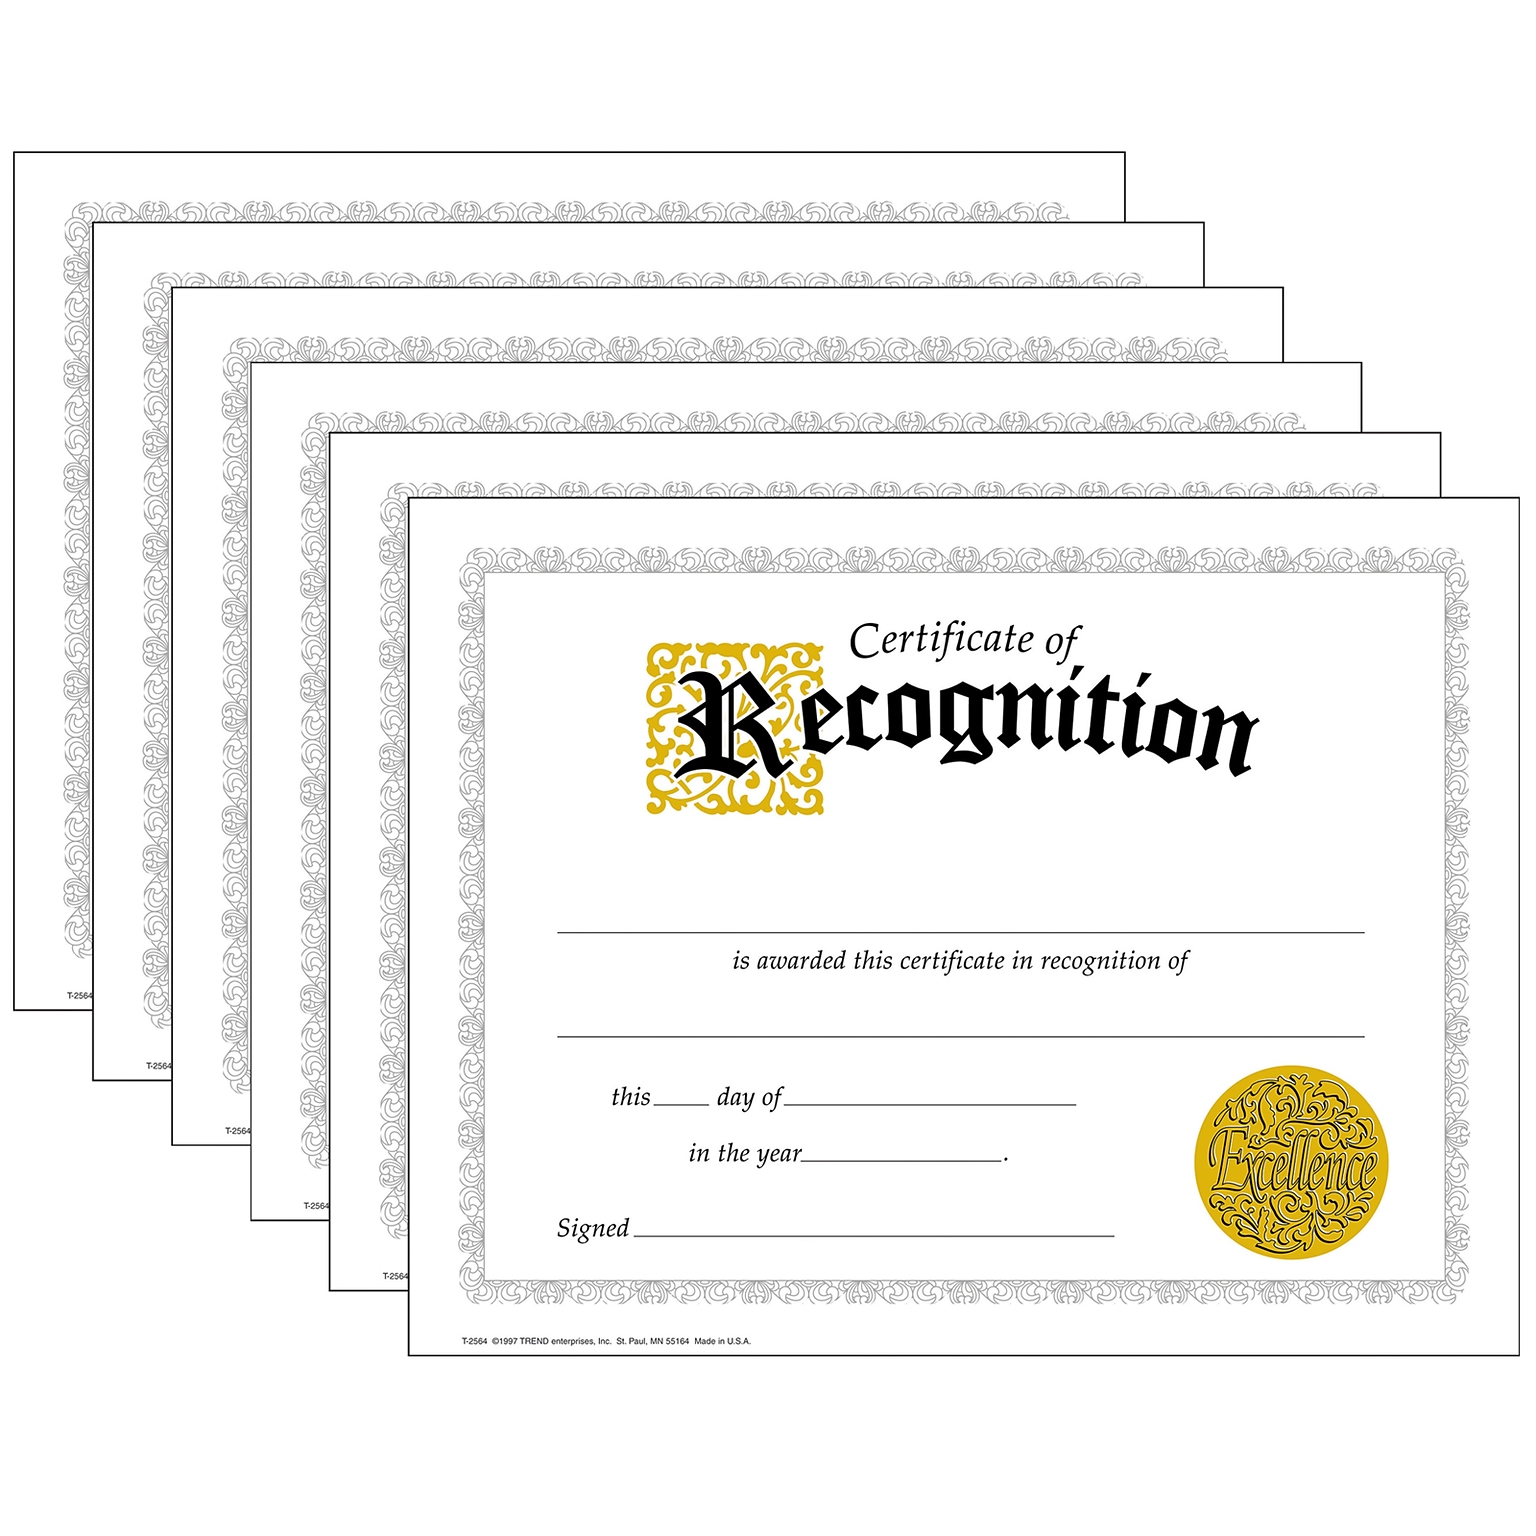 TREND Certificate of Recognition Classic Certificates, 30 Per Pack, 6 Packs (T-2564-6)